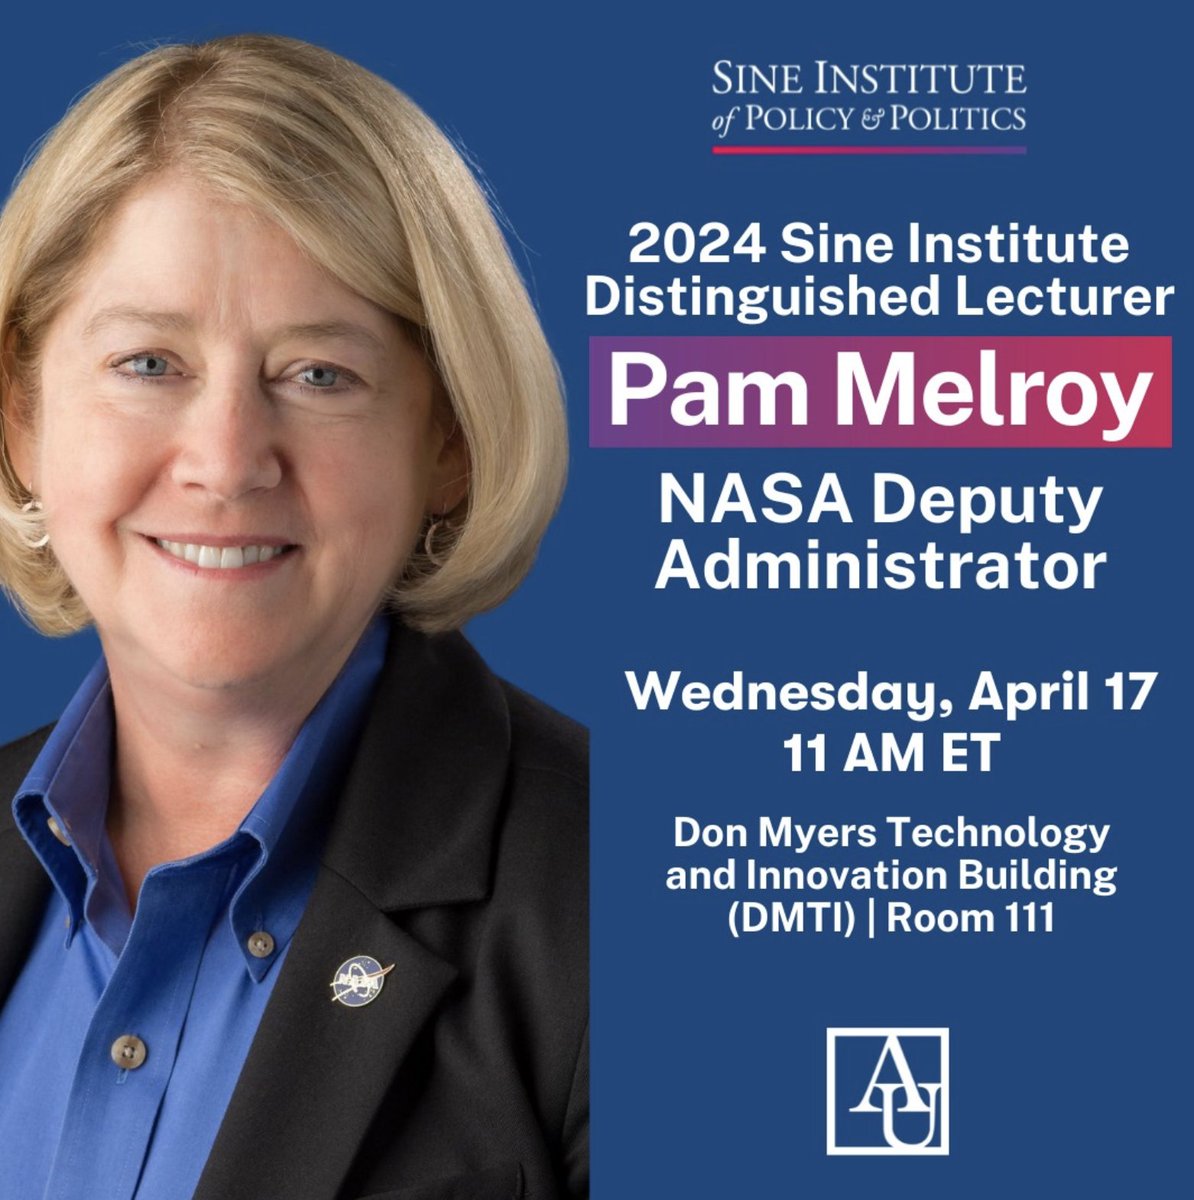 Mark your calendars! 🗓️ Join #2024SineFellow and NASA Deputy Administrator @Astro_Pam for a discussion on her career, women in STEM, and space exploration! Happening on April 17 at 11 a.m. RSVP here: bit.ly/4d2QI03